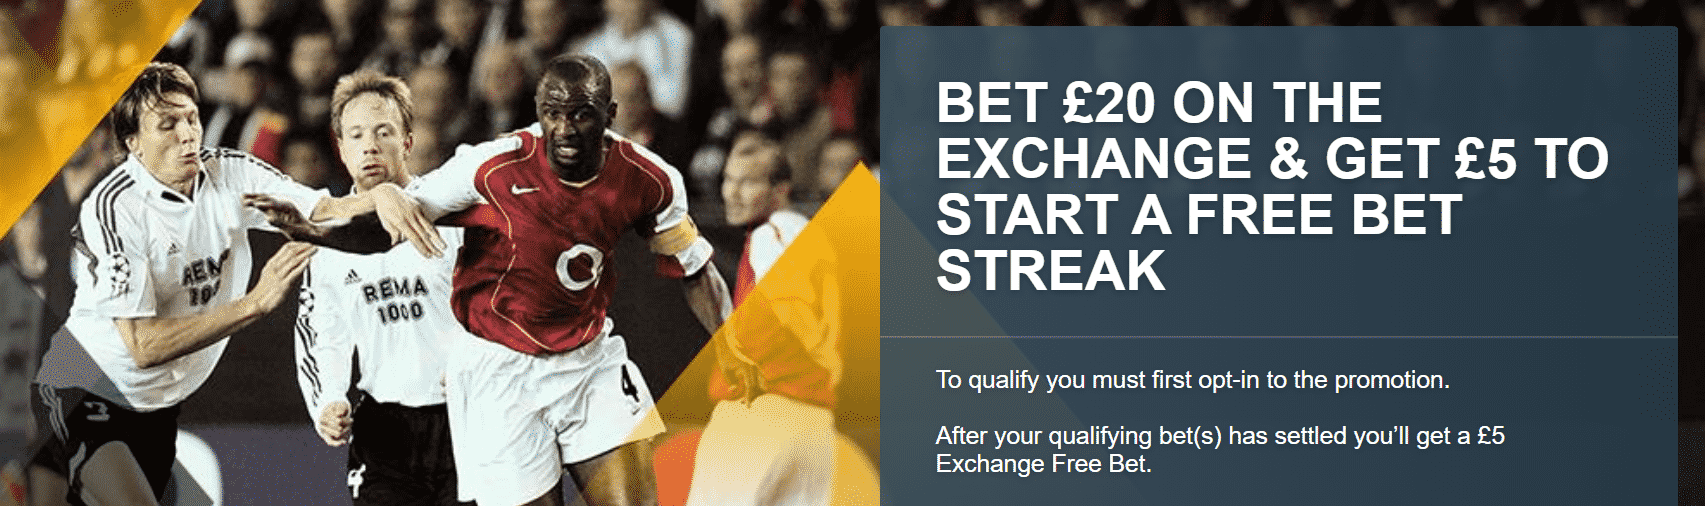 Banner showing the Betfair Exchange free bet offer